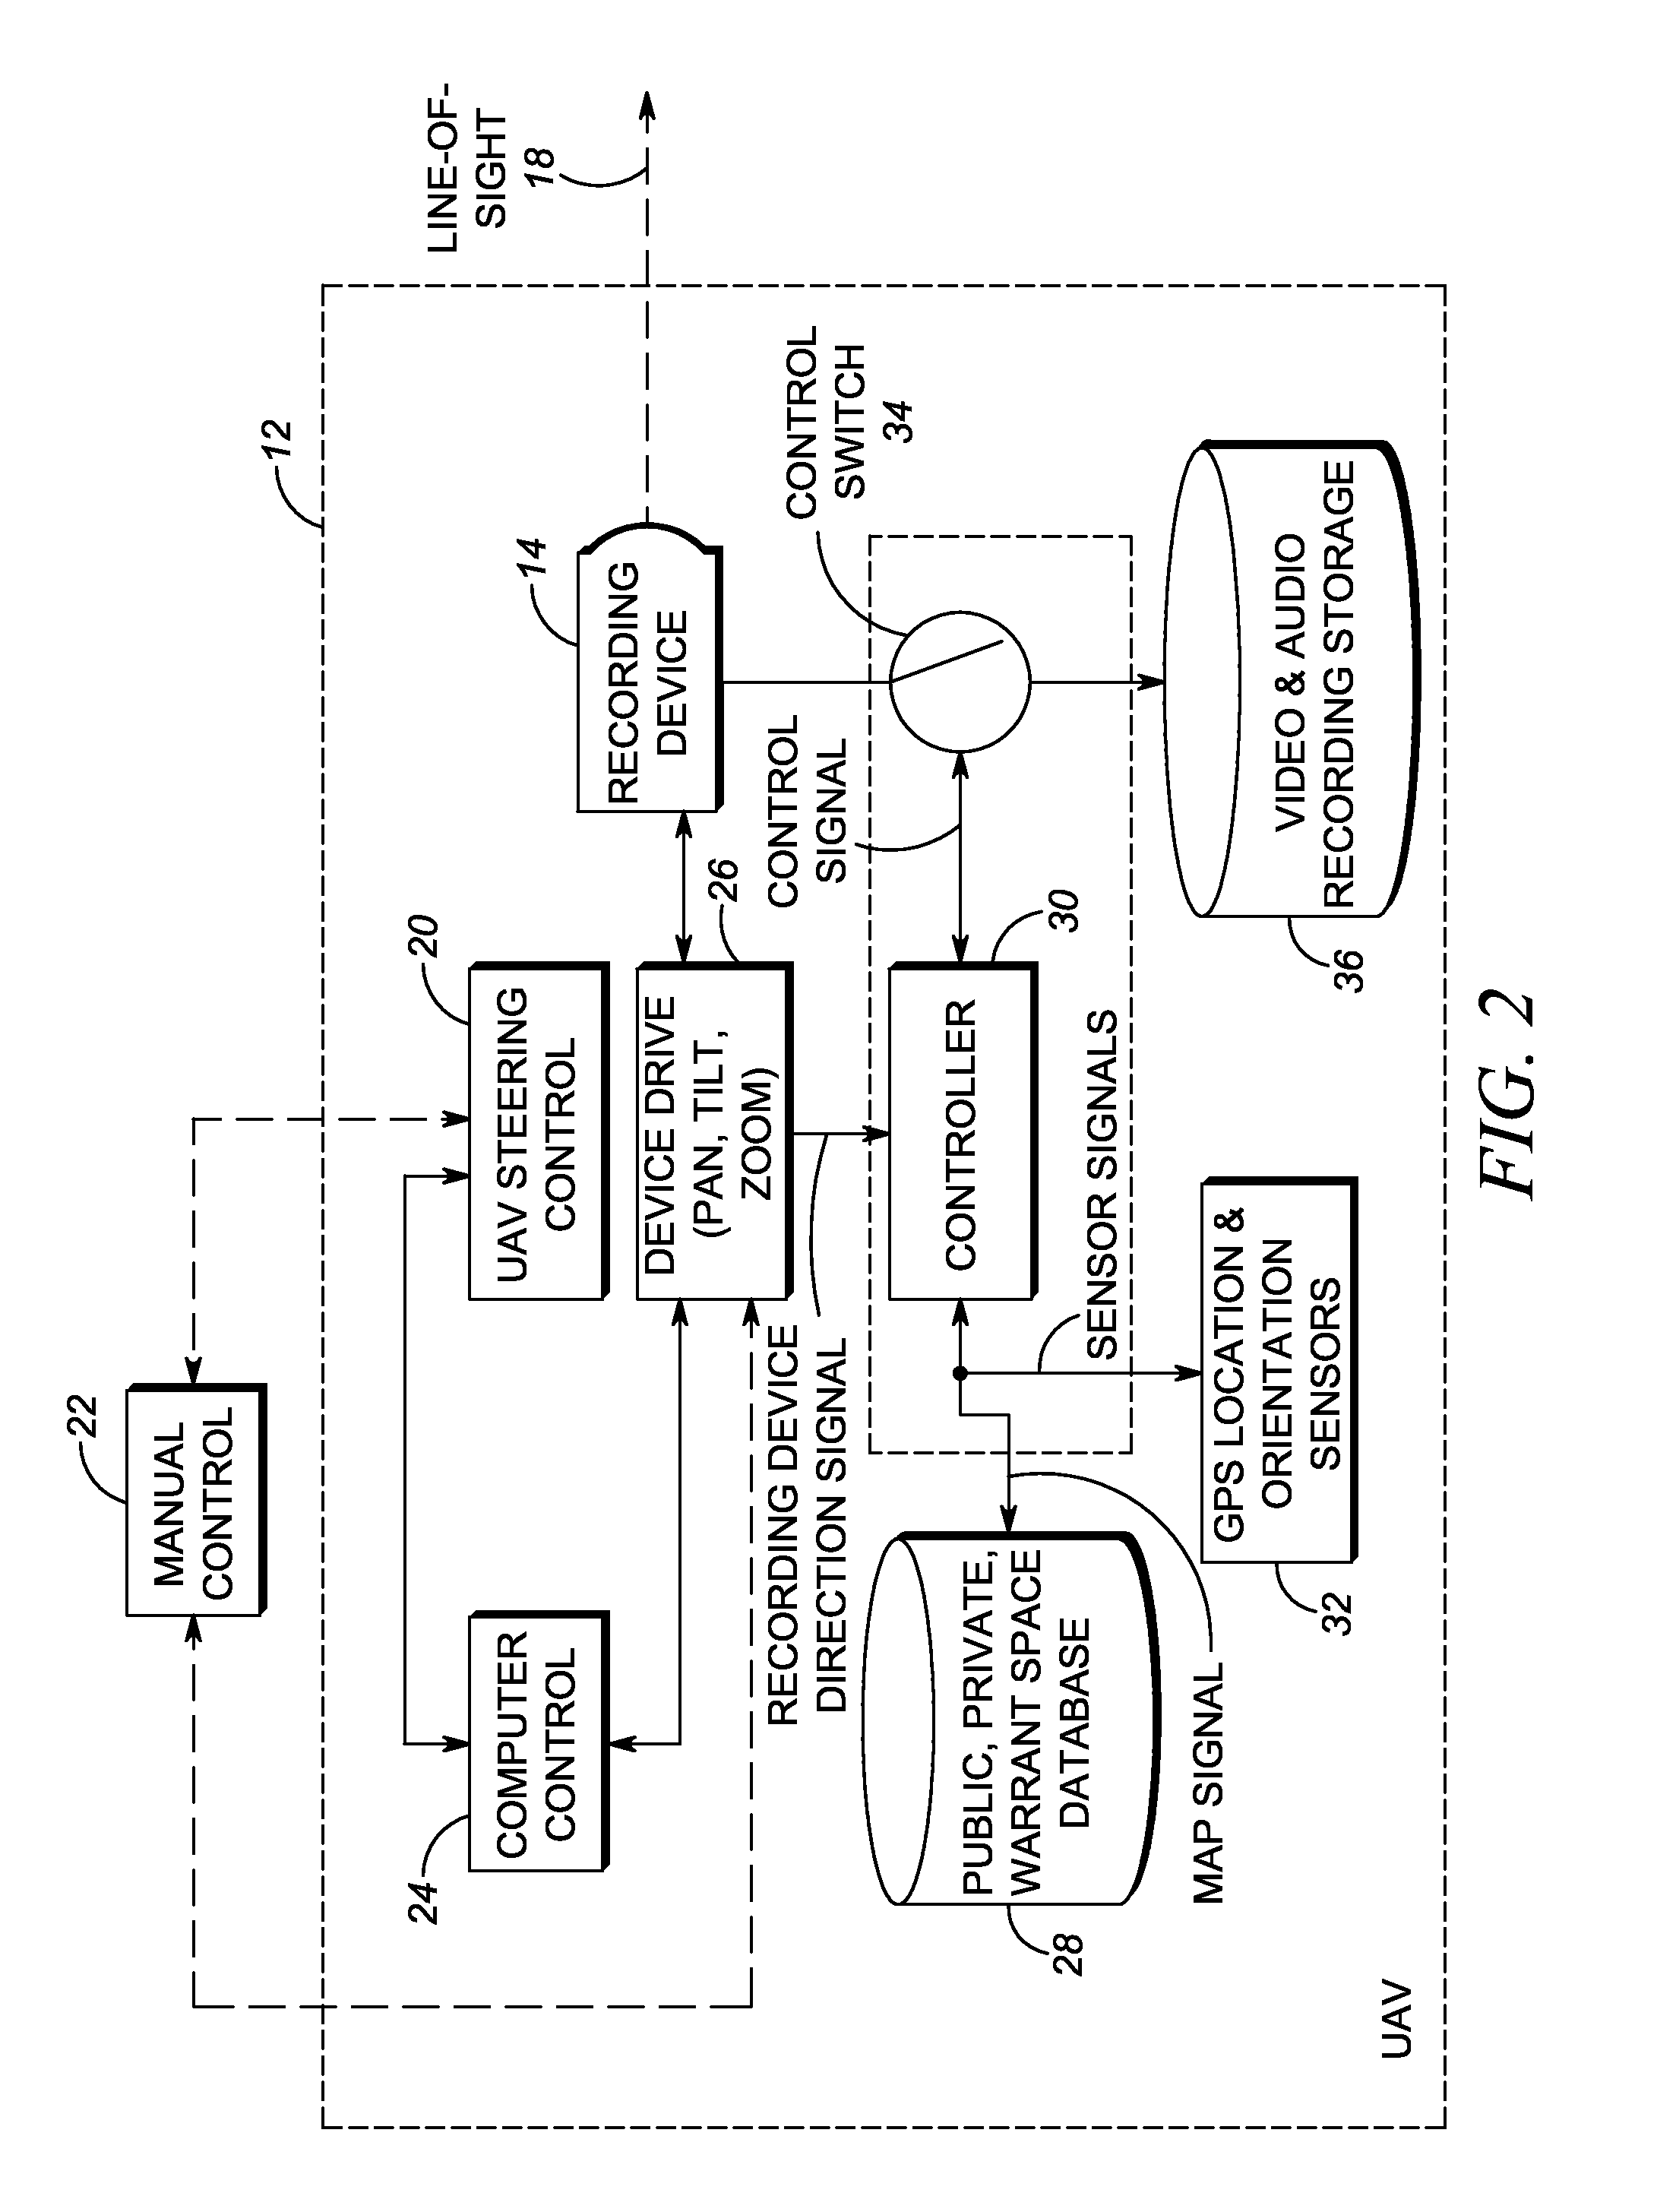 Method of and system for conducting mobile video/audio surveillance in compliance with privacy rights